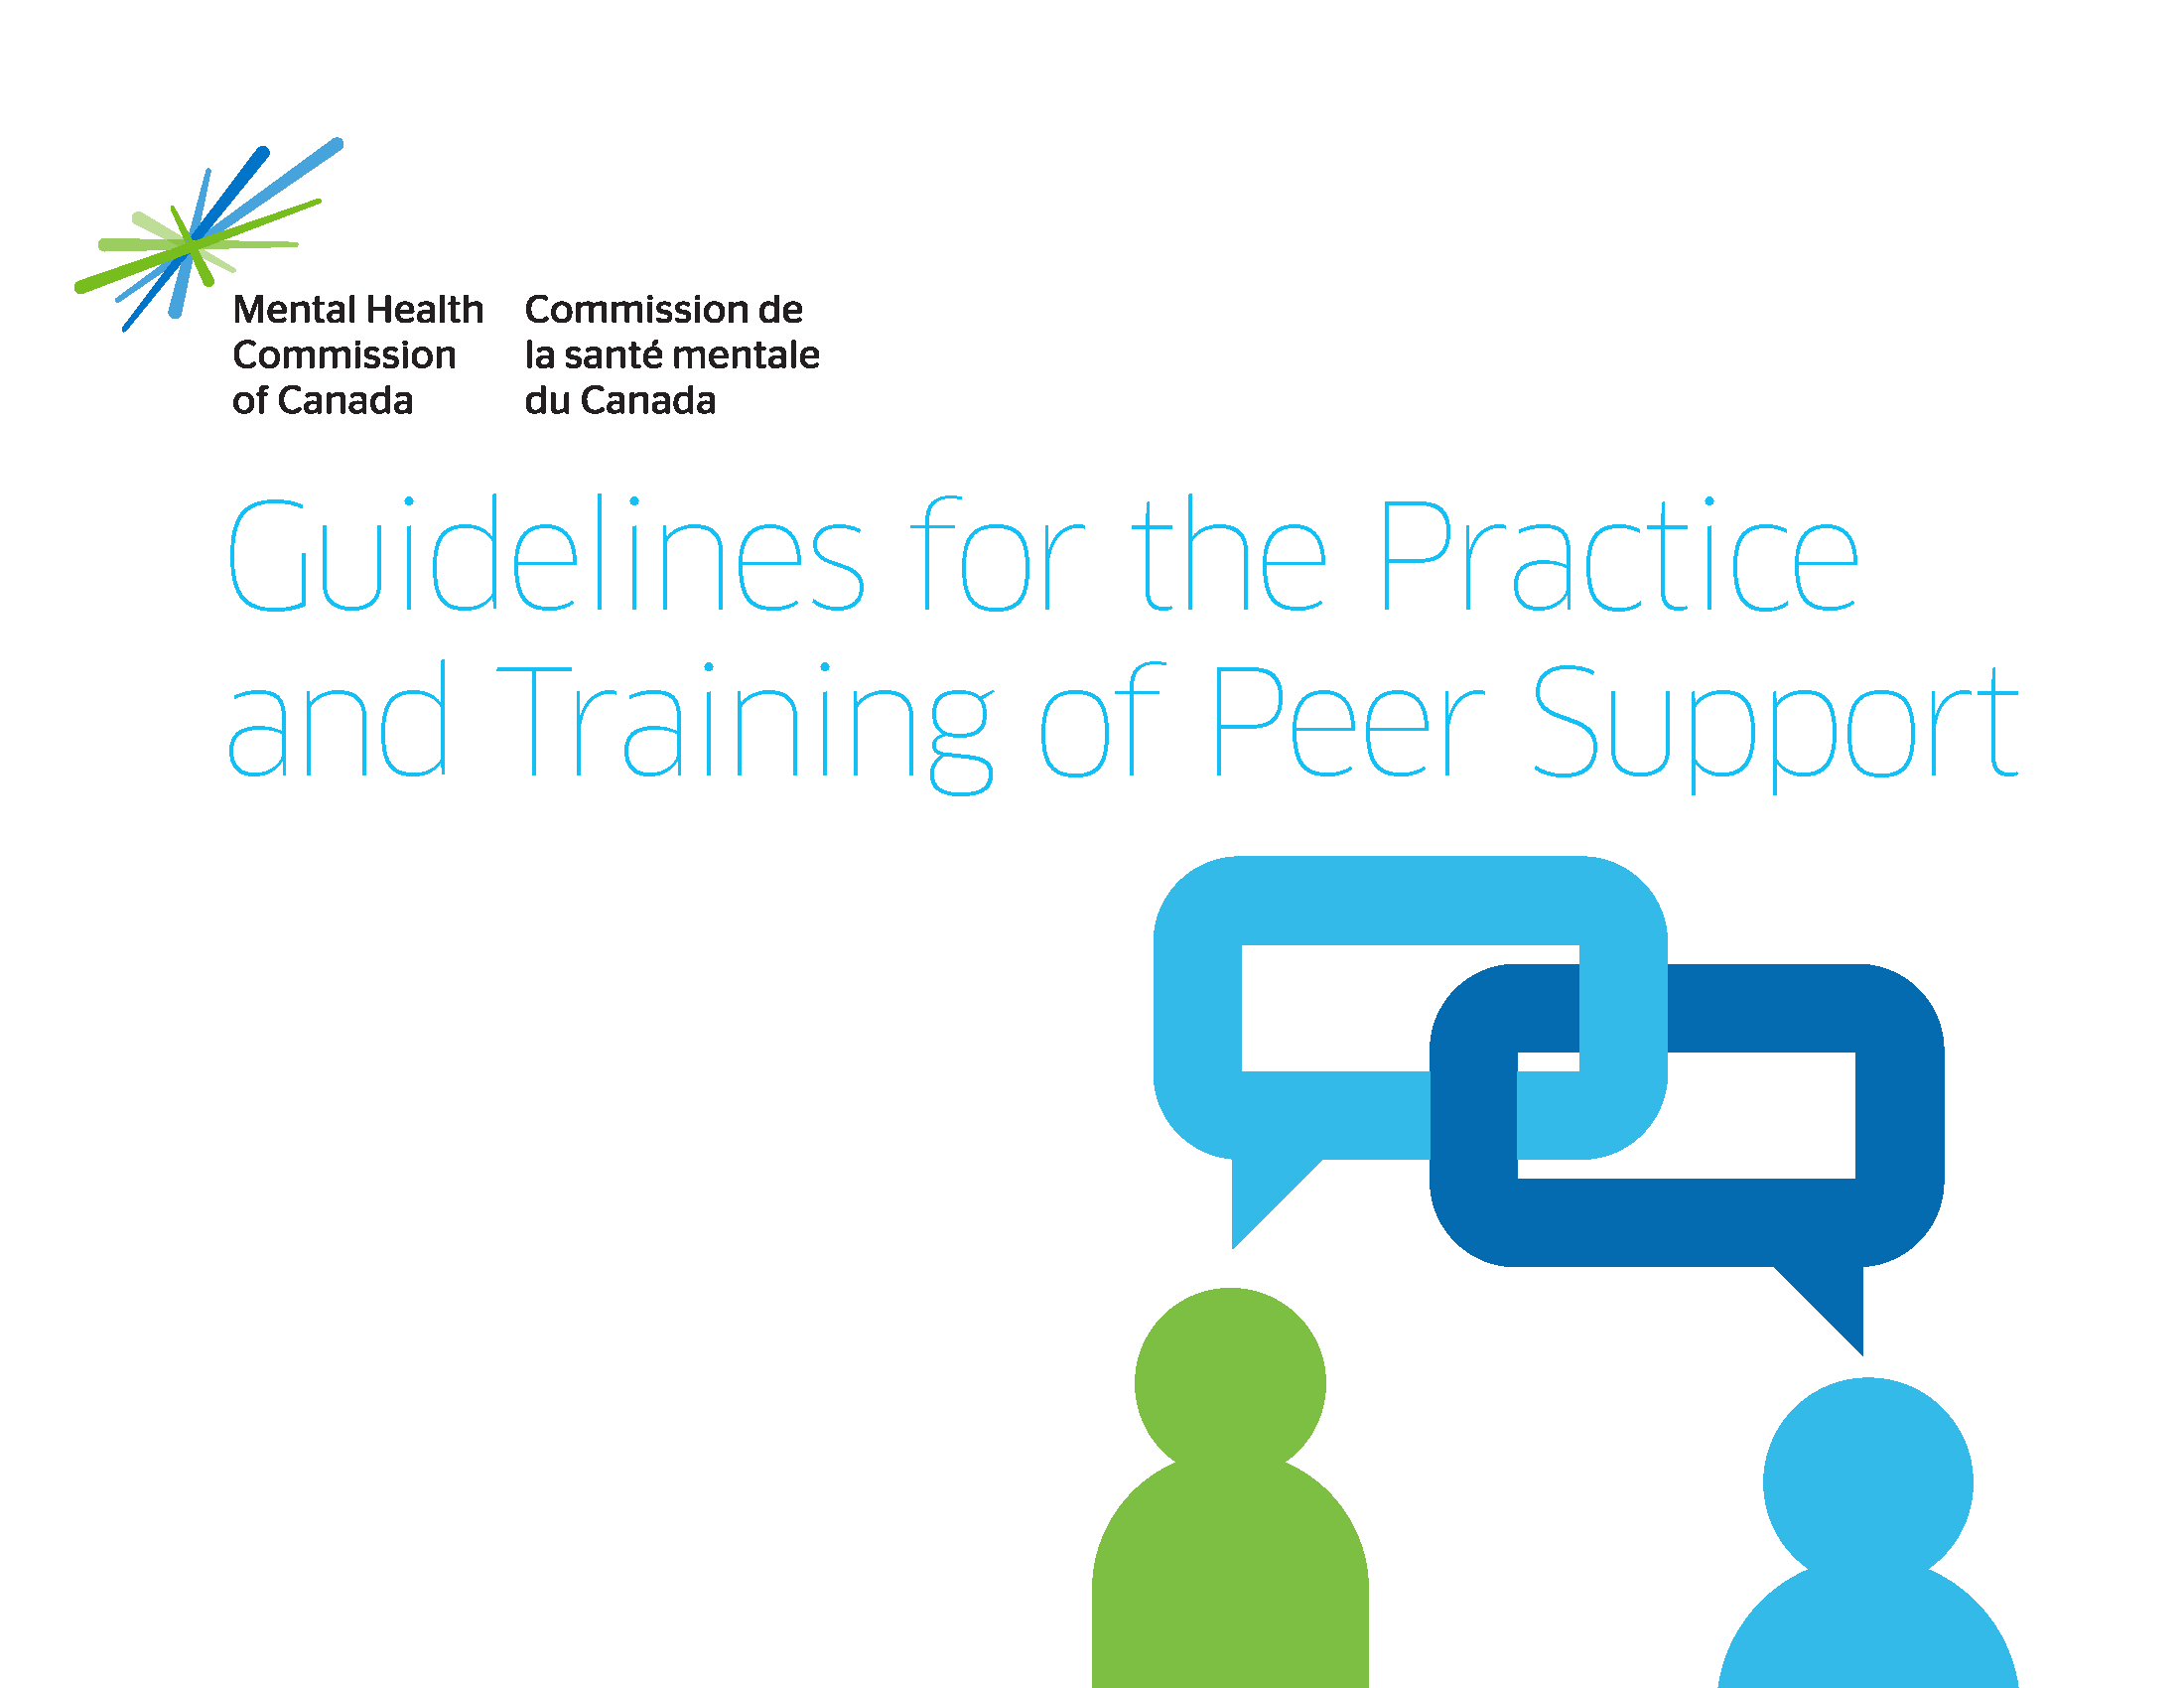 On a white background, in the top left corner appears the logo of the Mental Health Commission of Canada, a spark made up of blue and green lines. Below, we read the title of the document in light blue text, "Guidelines for the Practice and Training of Peer Support". In the bottom right corner, two outlines of people, one light green and one light blue, have interconnected speech bubbles above their heads. The interconnected speech bubbles are the MHCC's icon for peer support.